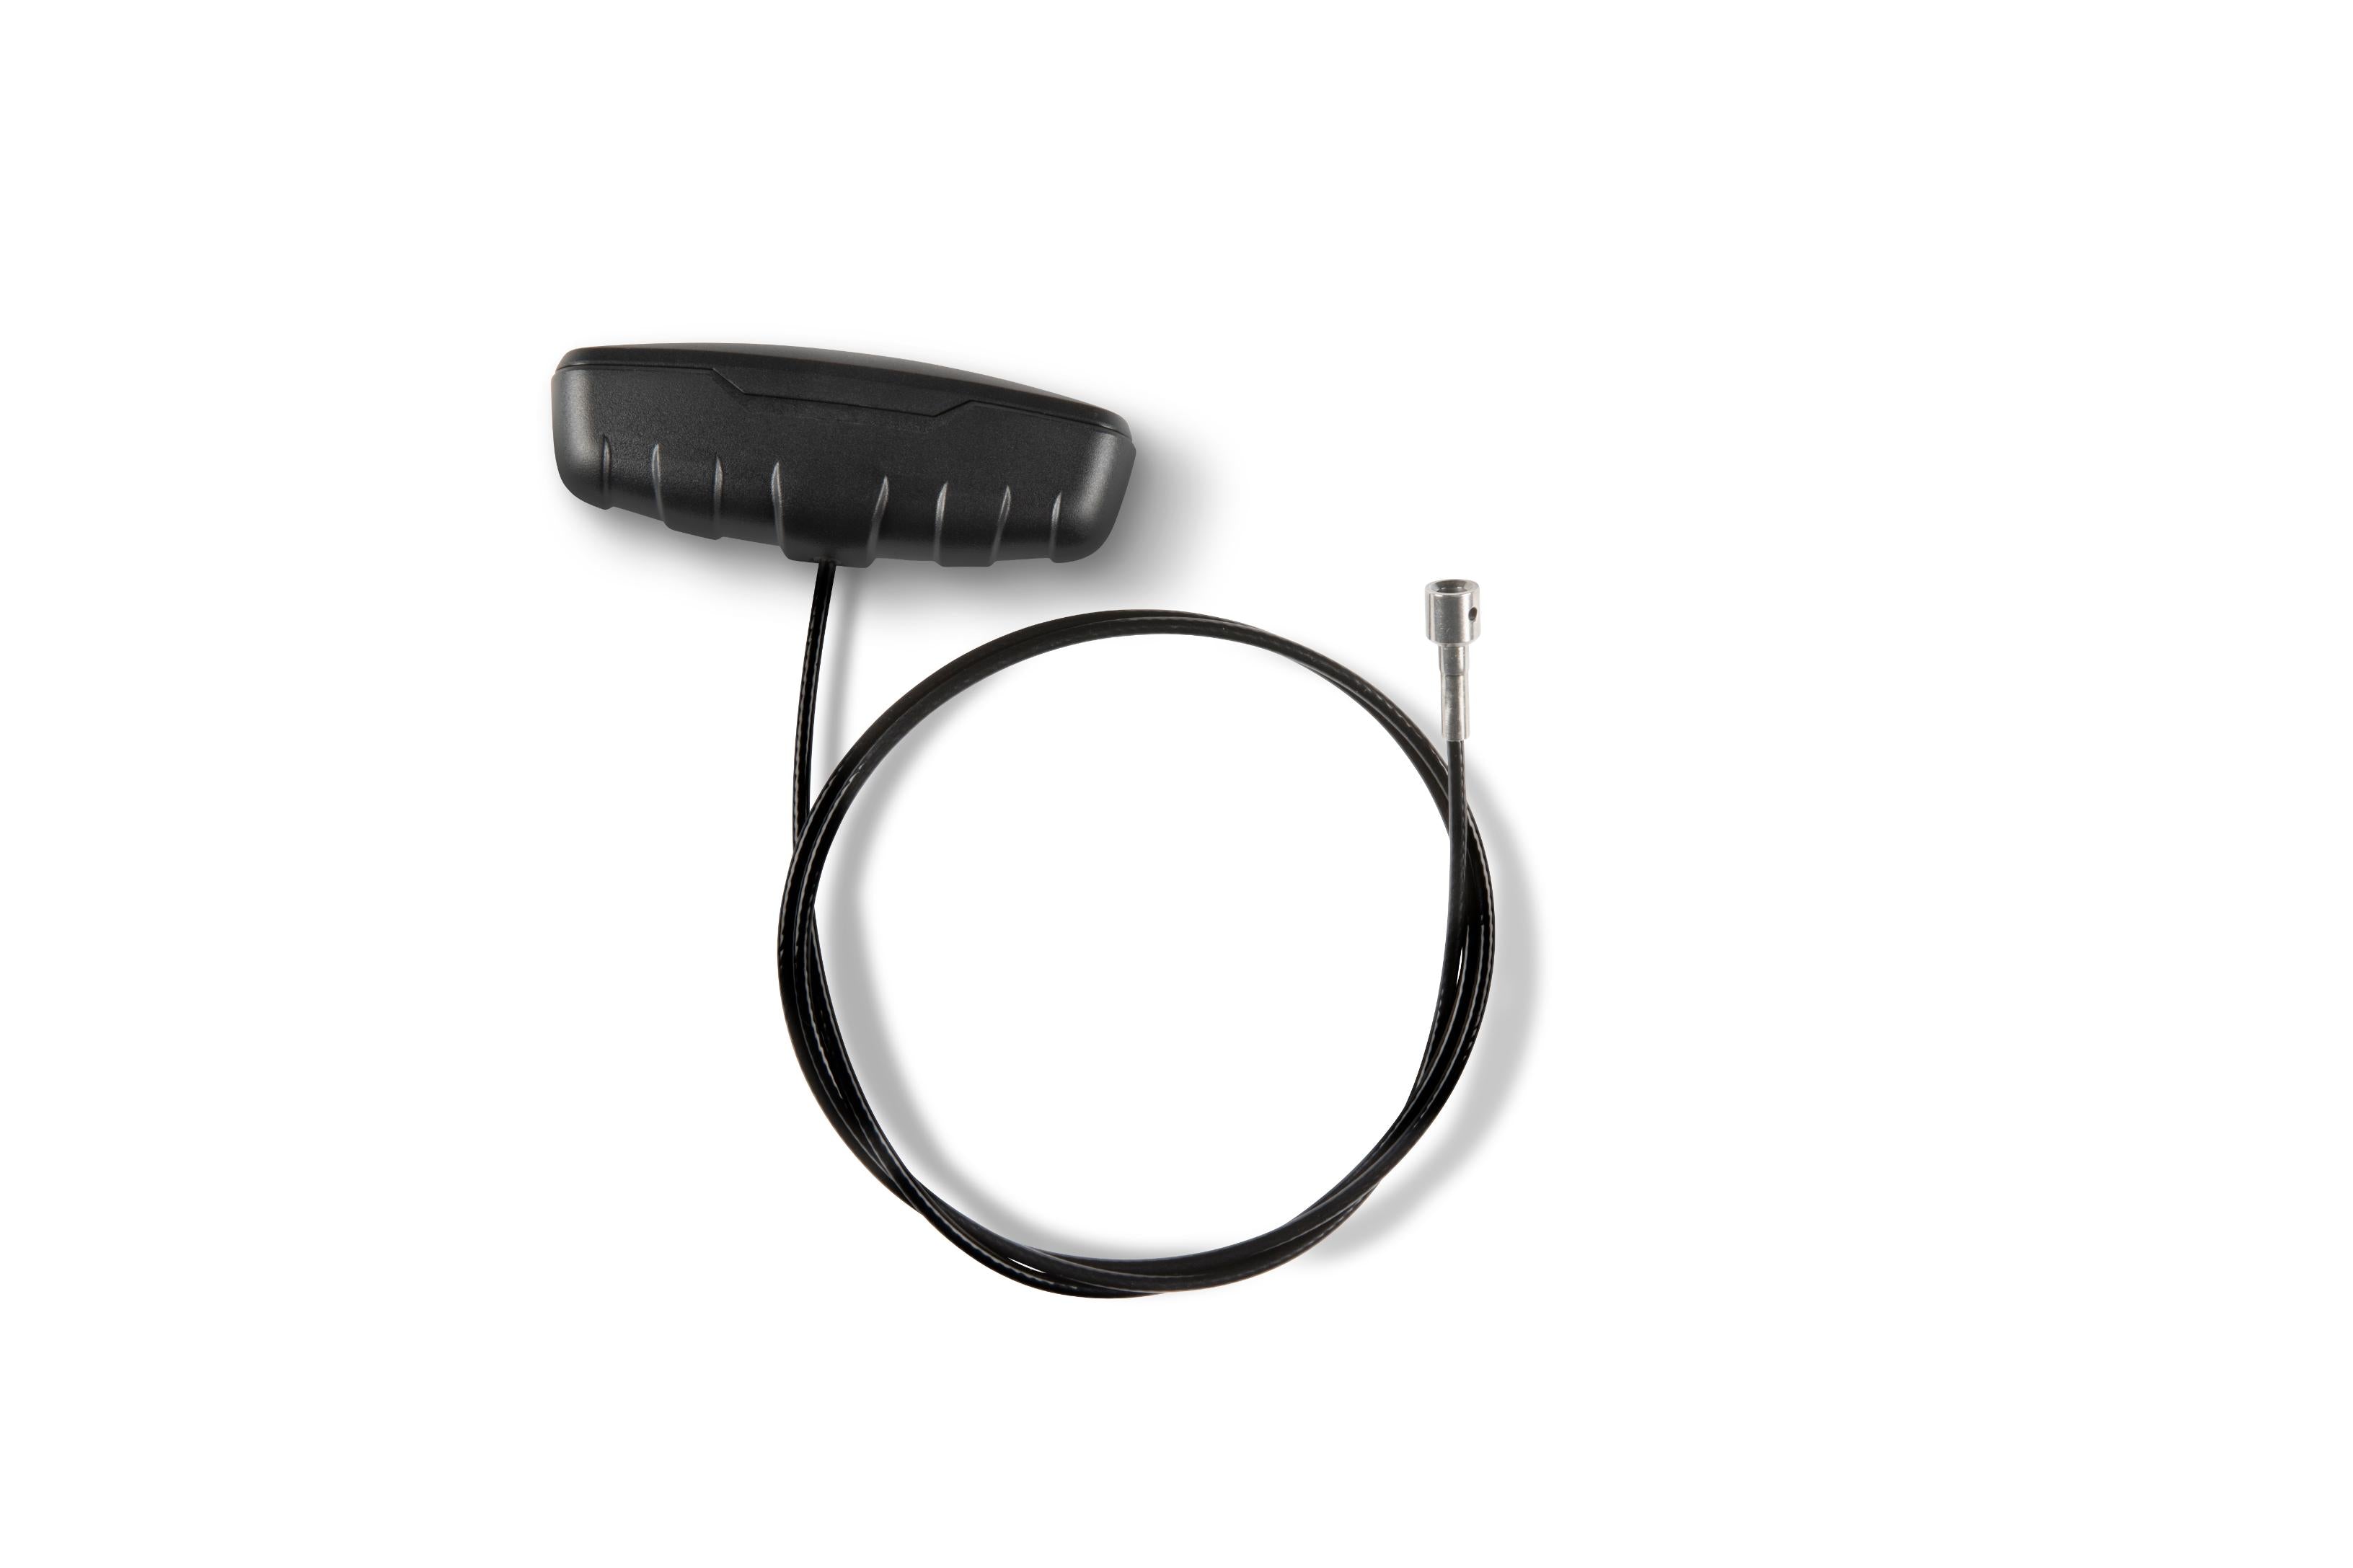 Garmin Force Trolling Motor Pull Handle & Cable